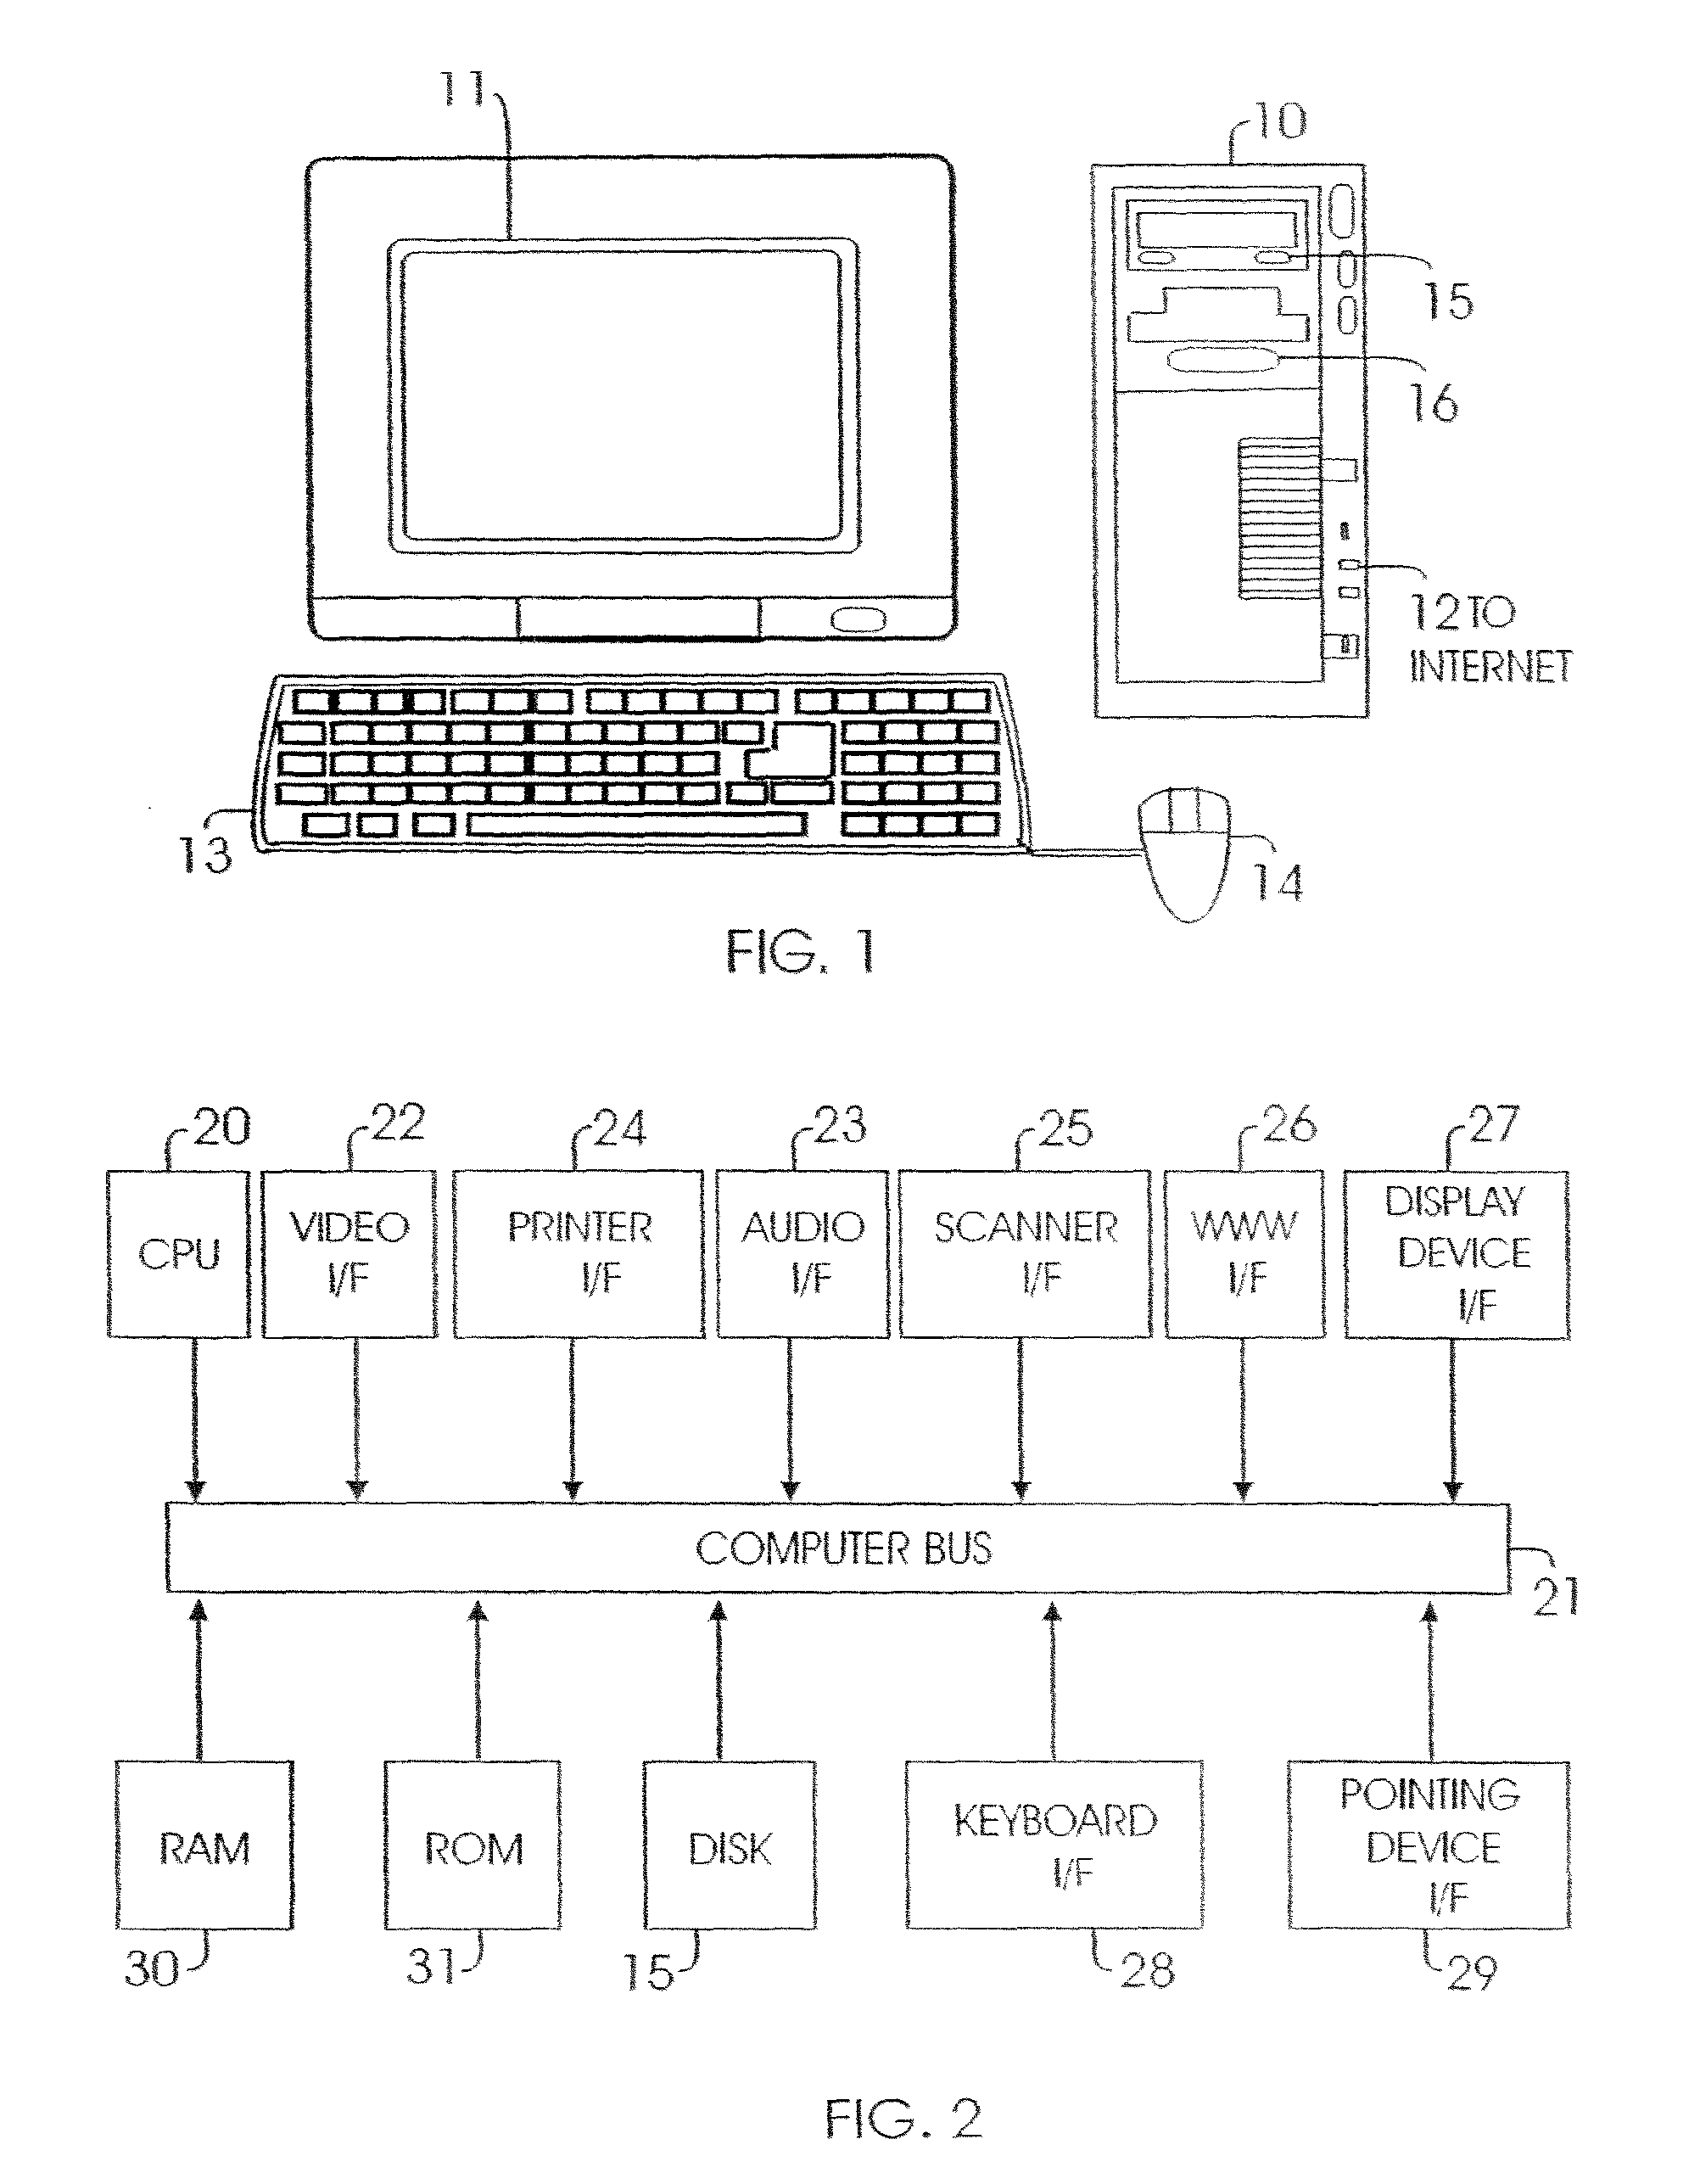 Method and system for machine understanding, knowledge, and conversation